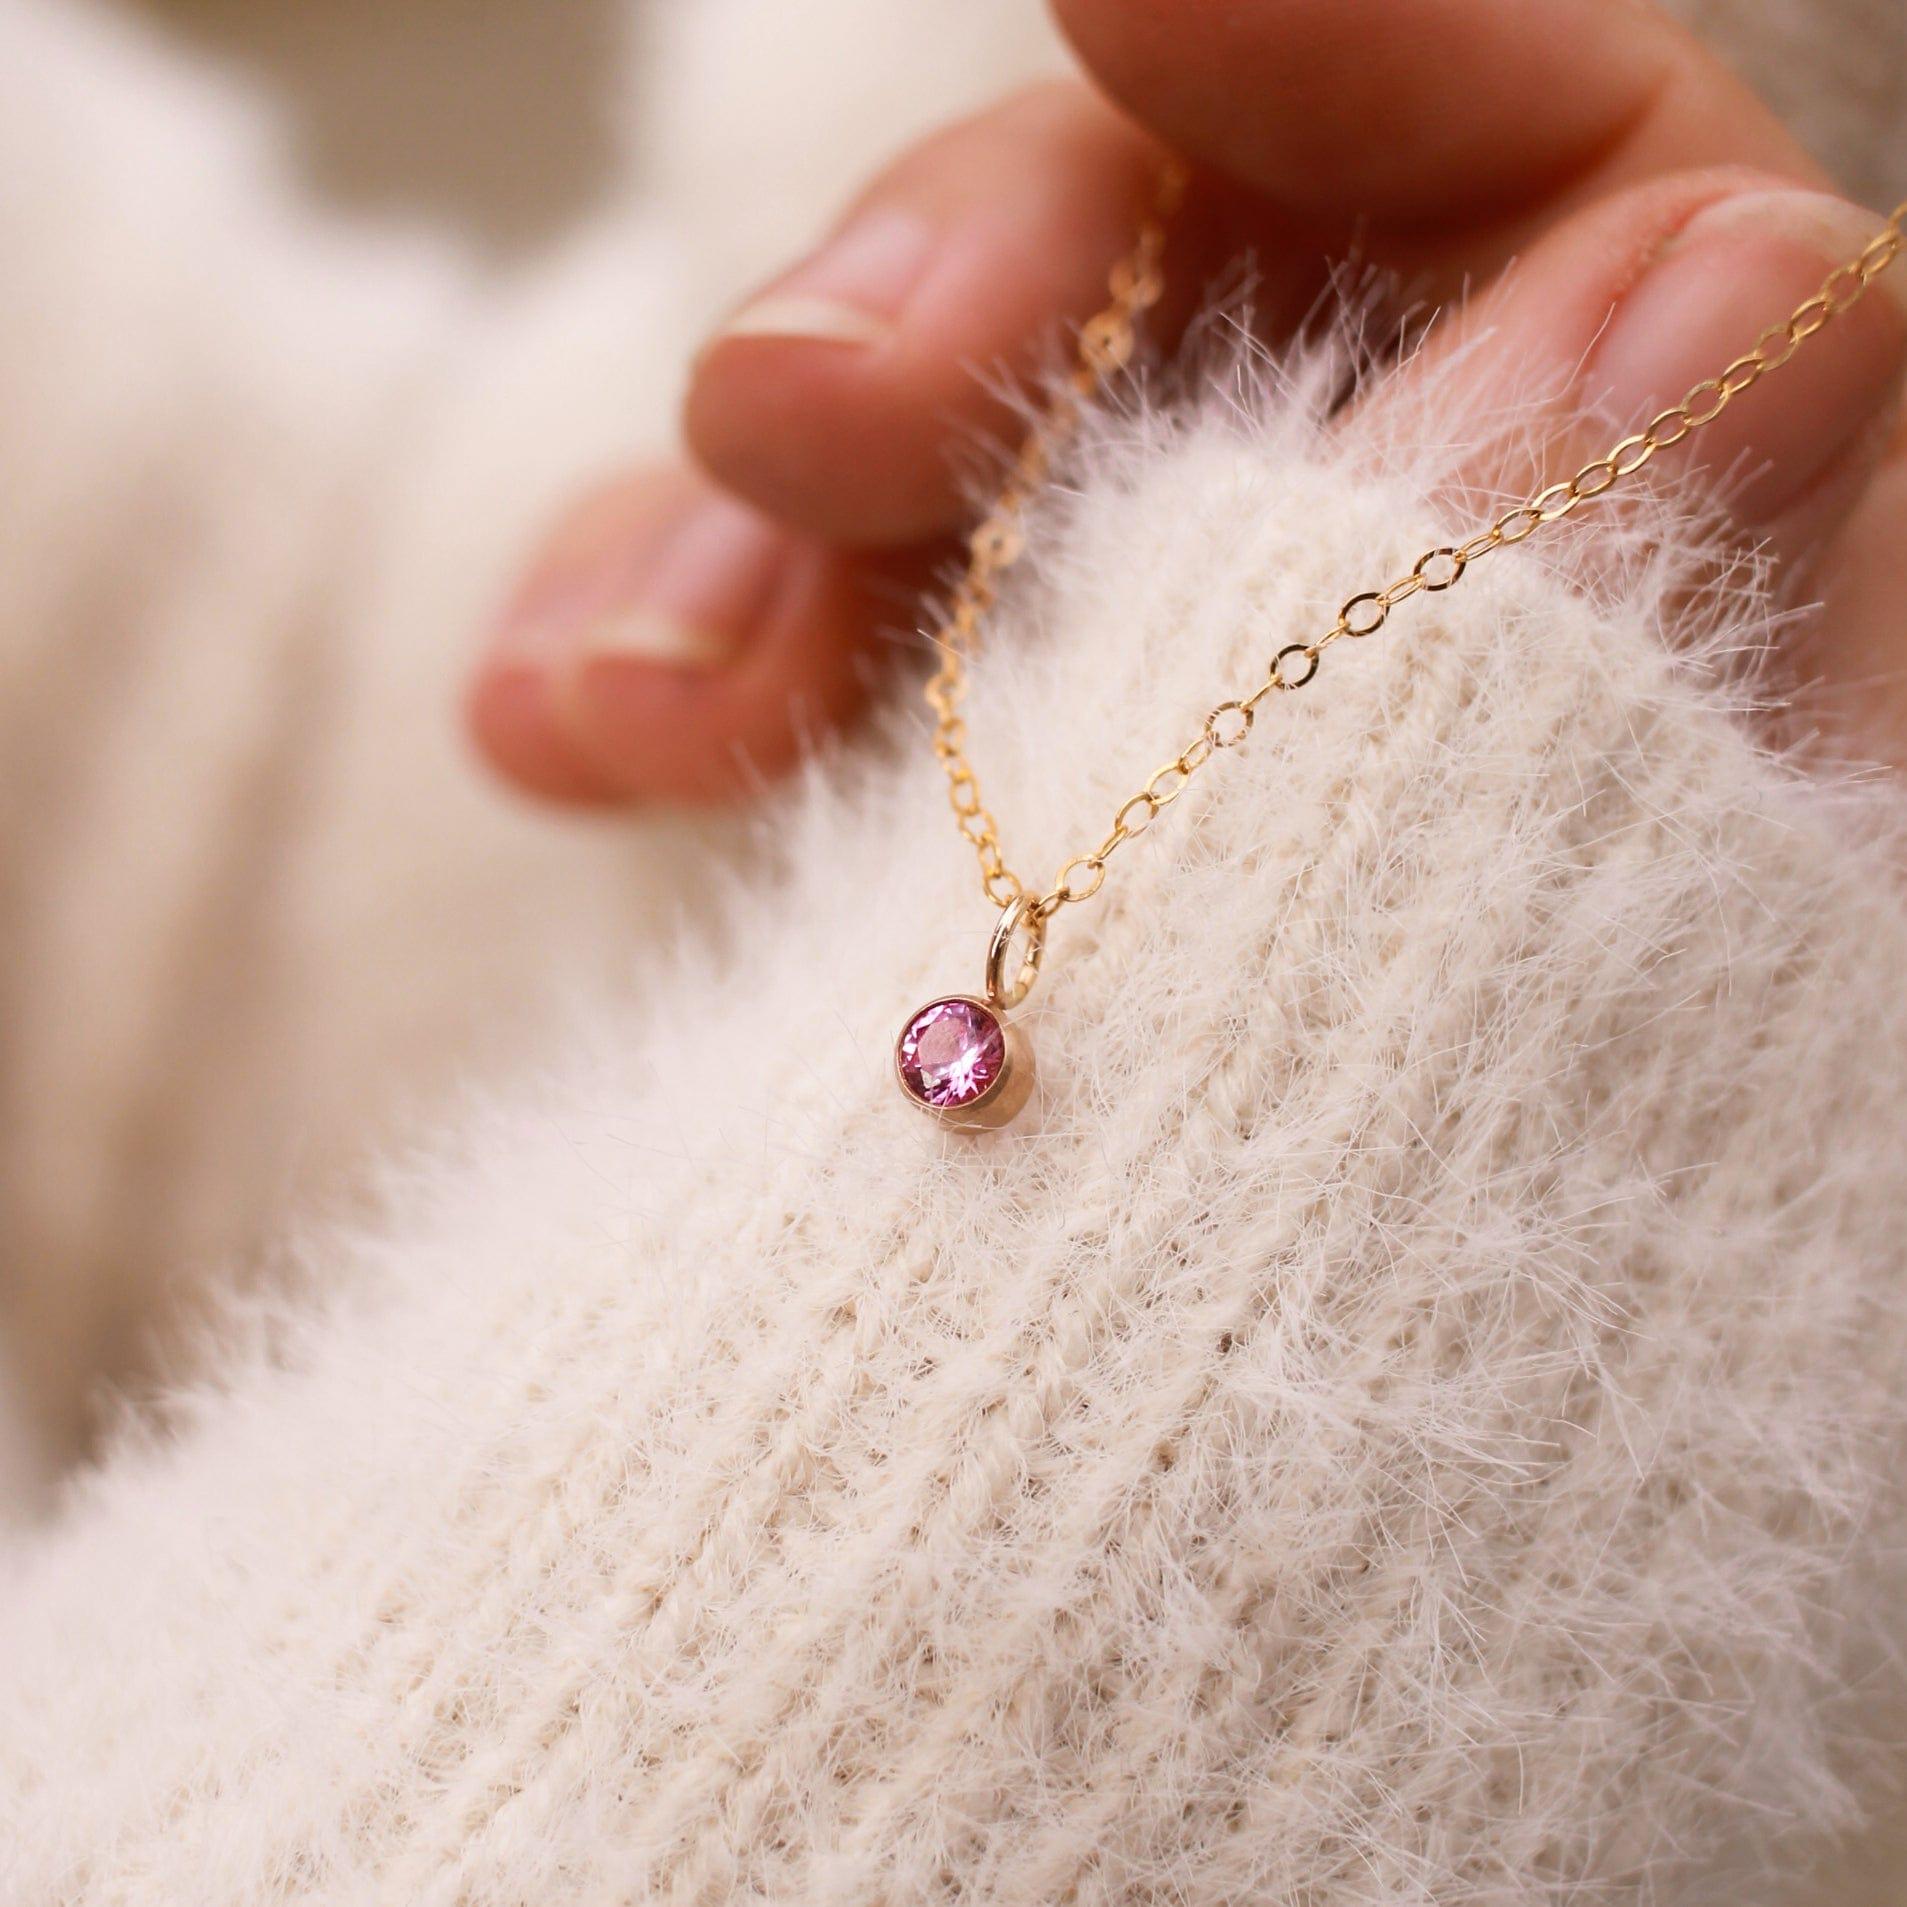 Birthstone Charm Necklace - Nolia Jewelry - Meaningful + Sustainably Handcrafted Jewelry